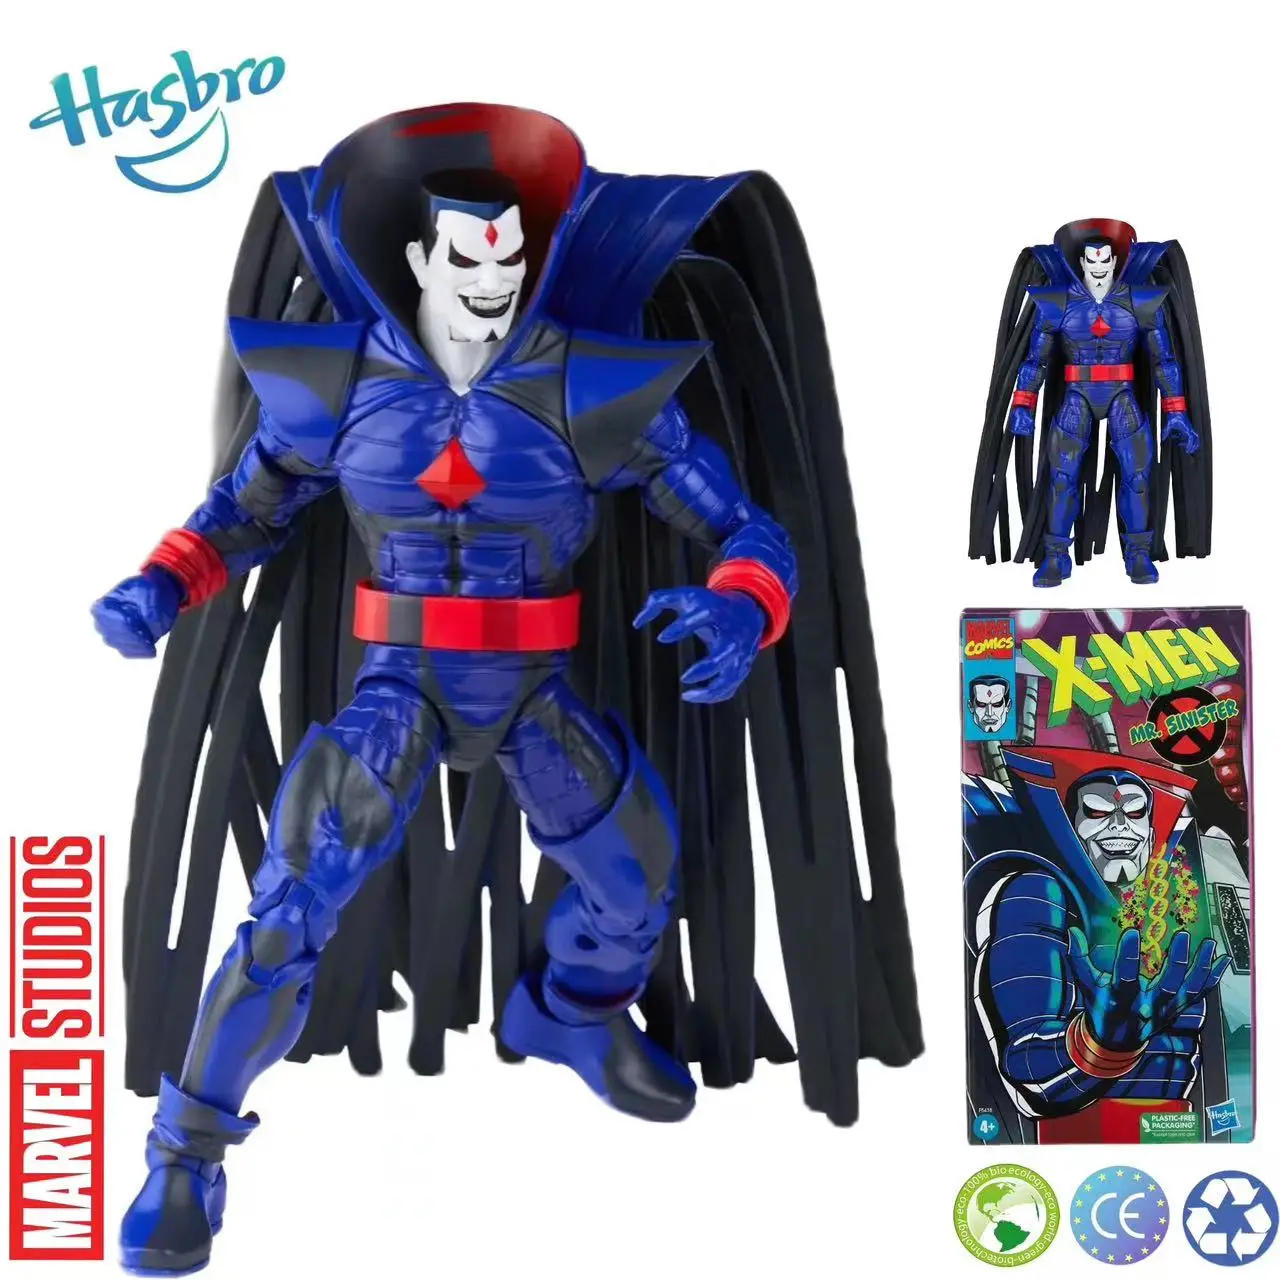 

Hasbro Original Marvel Legends Series X-Men Mr. Sinister 90S Animated Series Action Figure 6 Inch Collectible Model Toy